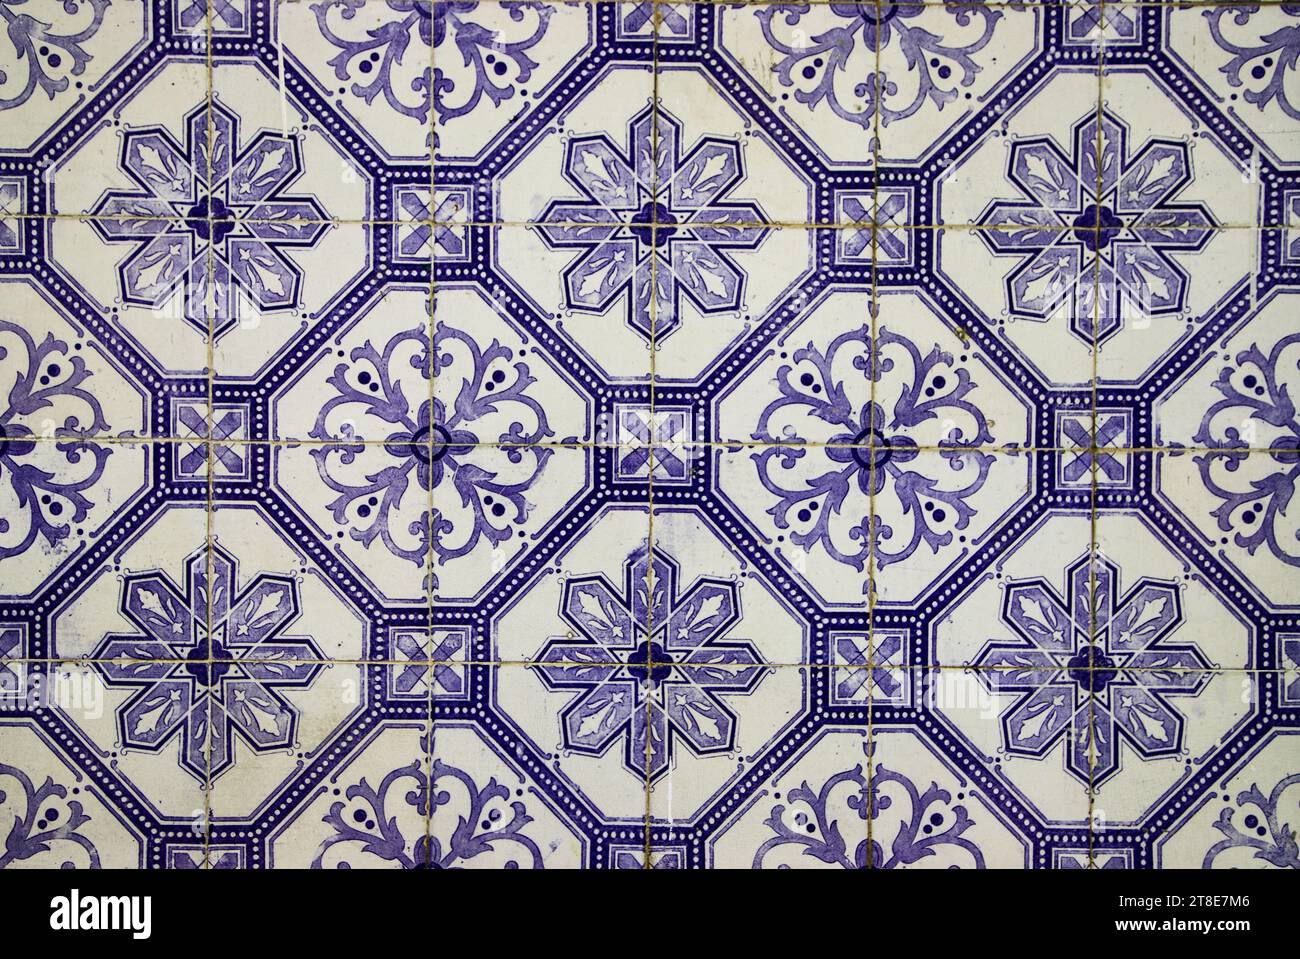 Typical lisbon tiles pattern with flowers, Lisbon Stock Photo